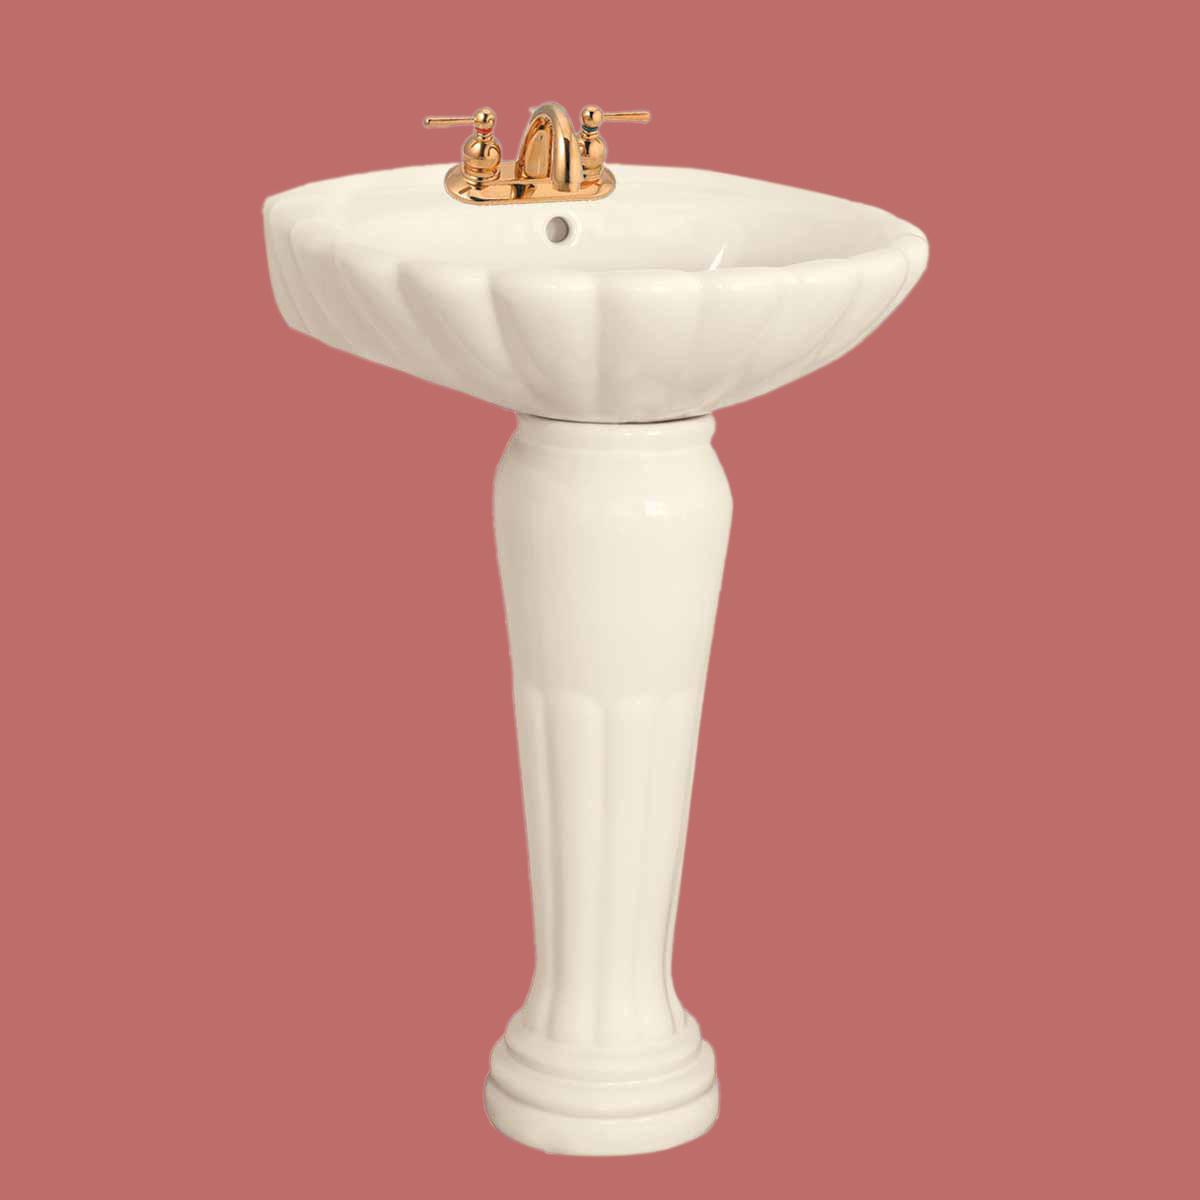 Renovators Supply Deluxe Classic Pedestal Sink Off White